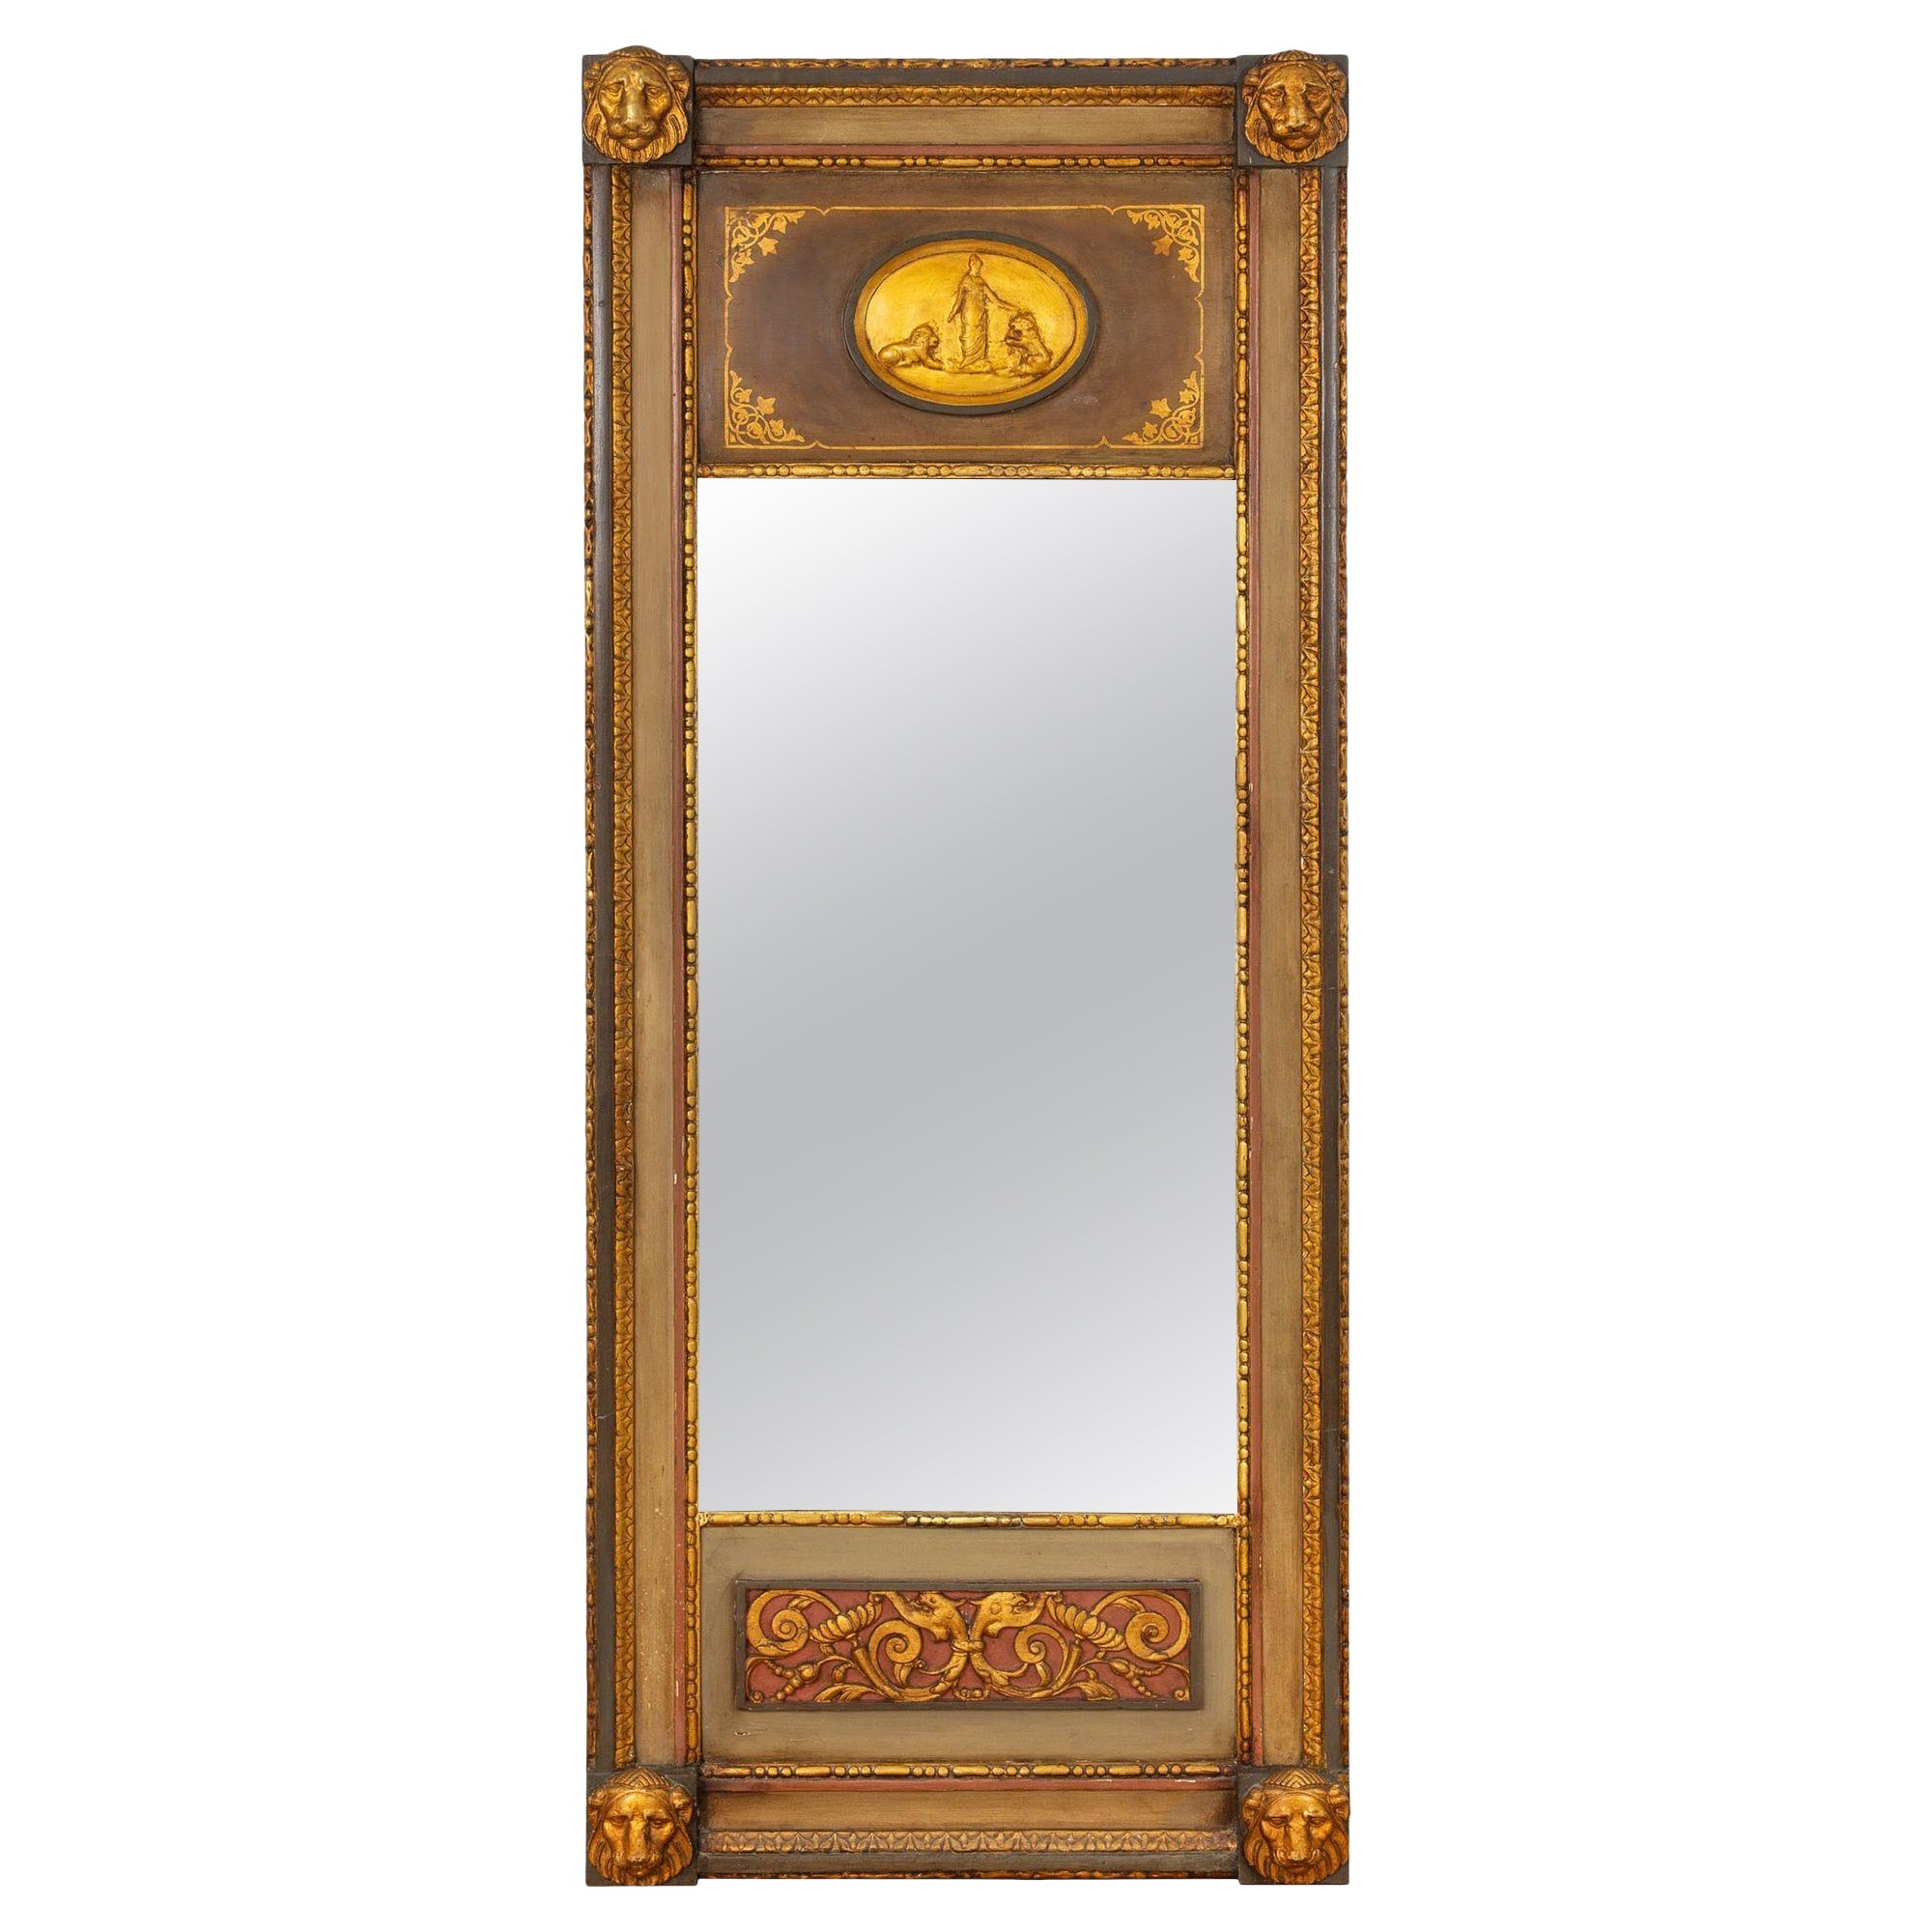 Northern European Neoclassical Painted Antique Pier Mirror, 19th Century